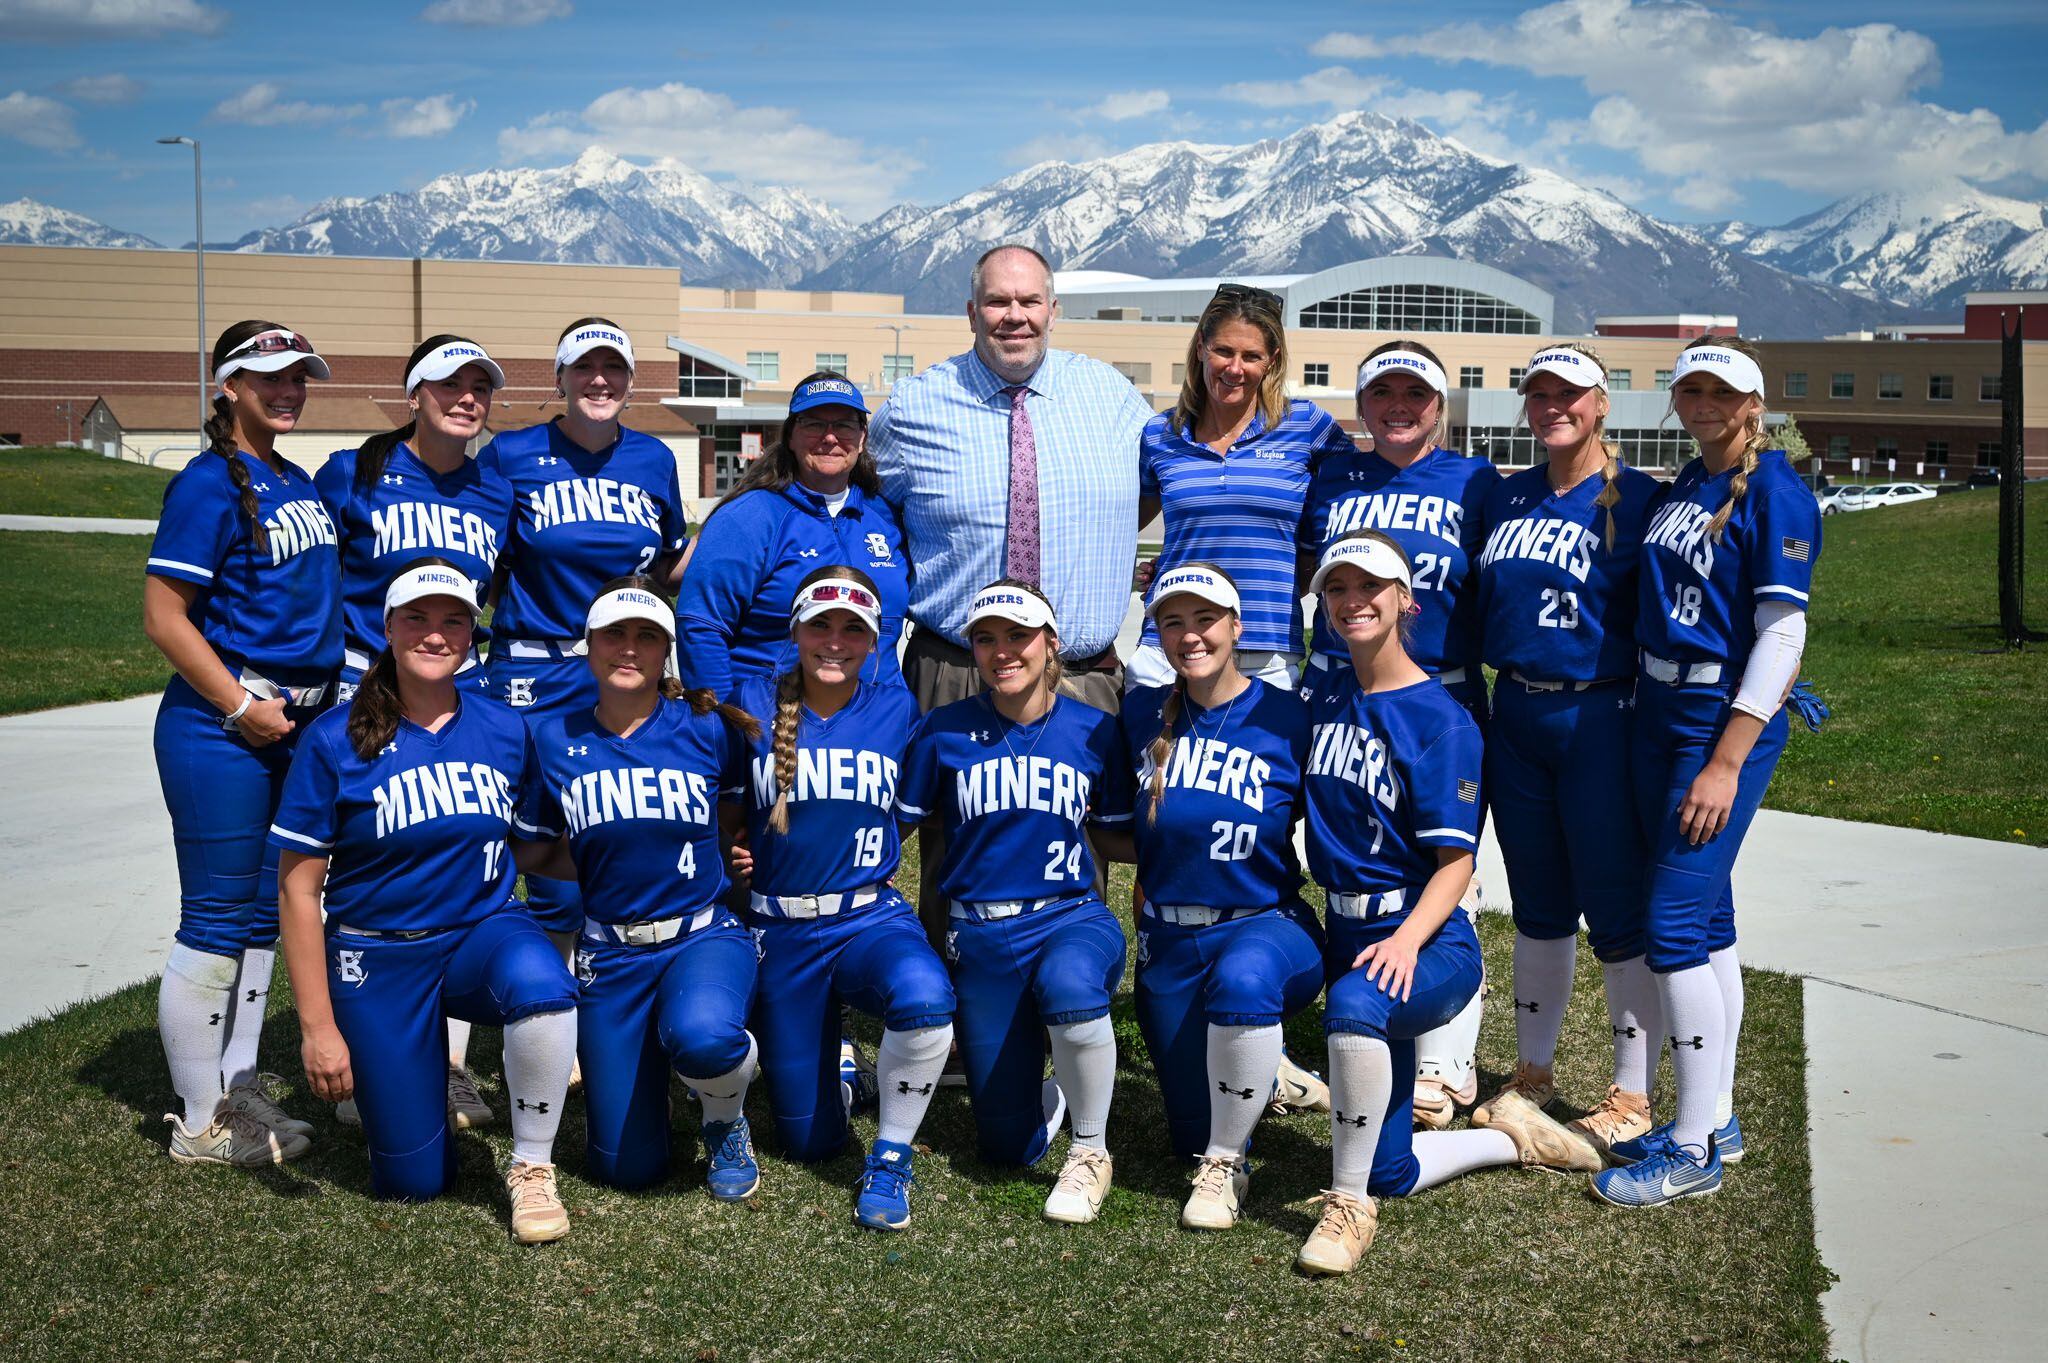 (Jordan School District) Bryan Veazie, center, postes for a photo with the Bingham High softball team. He is the district's Title IX athletic coordinator, appointed as a result of the girls' football lawsuit settlement.